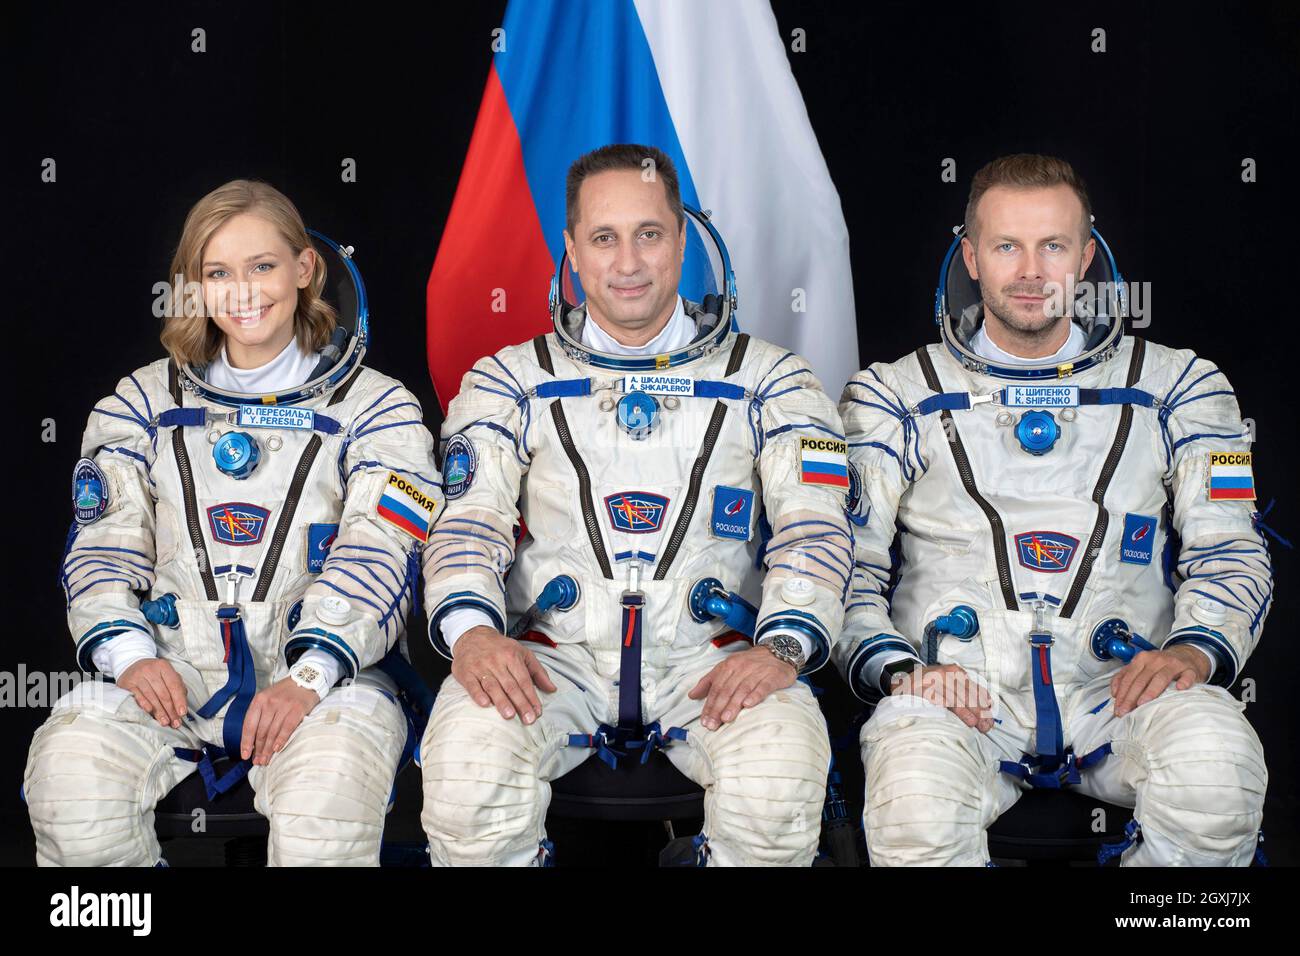 Russian Soyuz 65S prime crew members Yulia Peresild, left, Anton Shkaplerov and Klim Shipenko, right, poses for a portrait at the Gagarin Cosmonaut Training Center August 26, 2021 in Star City, Russia. The crew will be the first to film a motion picture aboard the International Space Station. Stock Photo